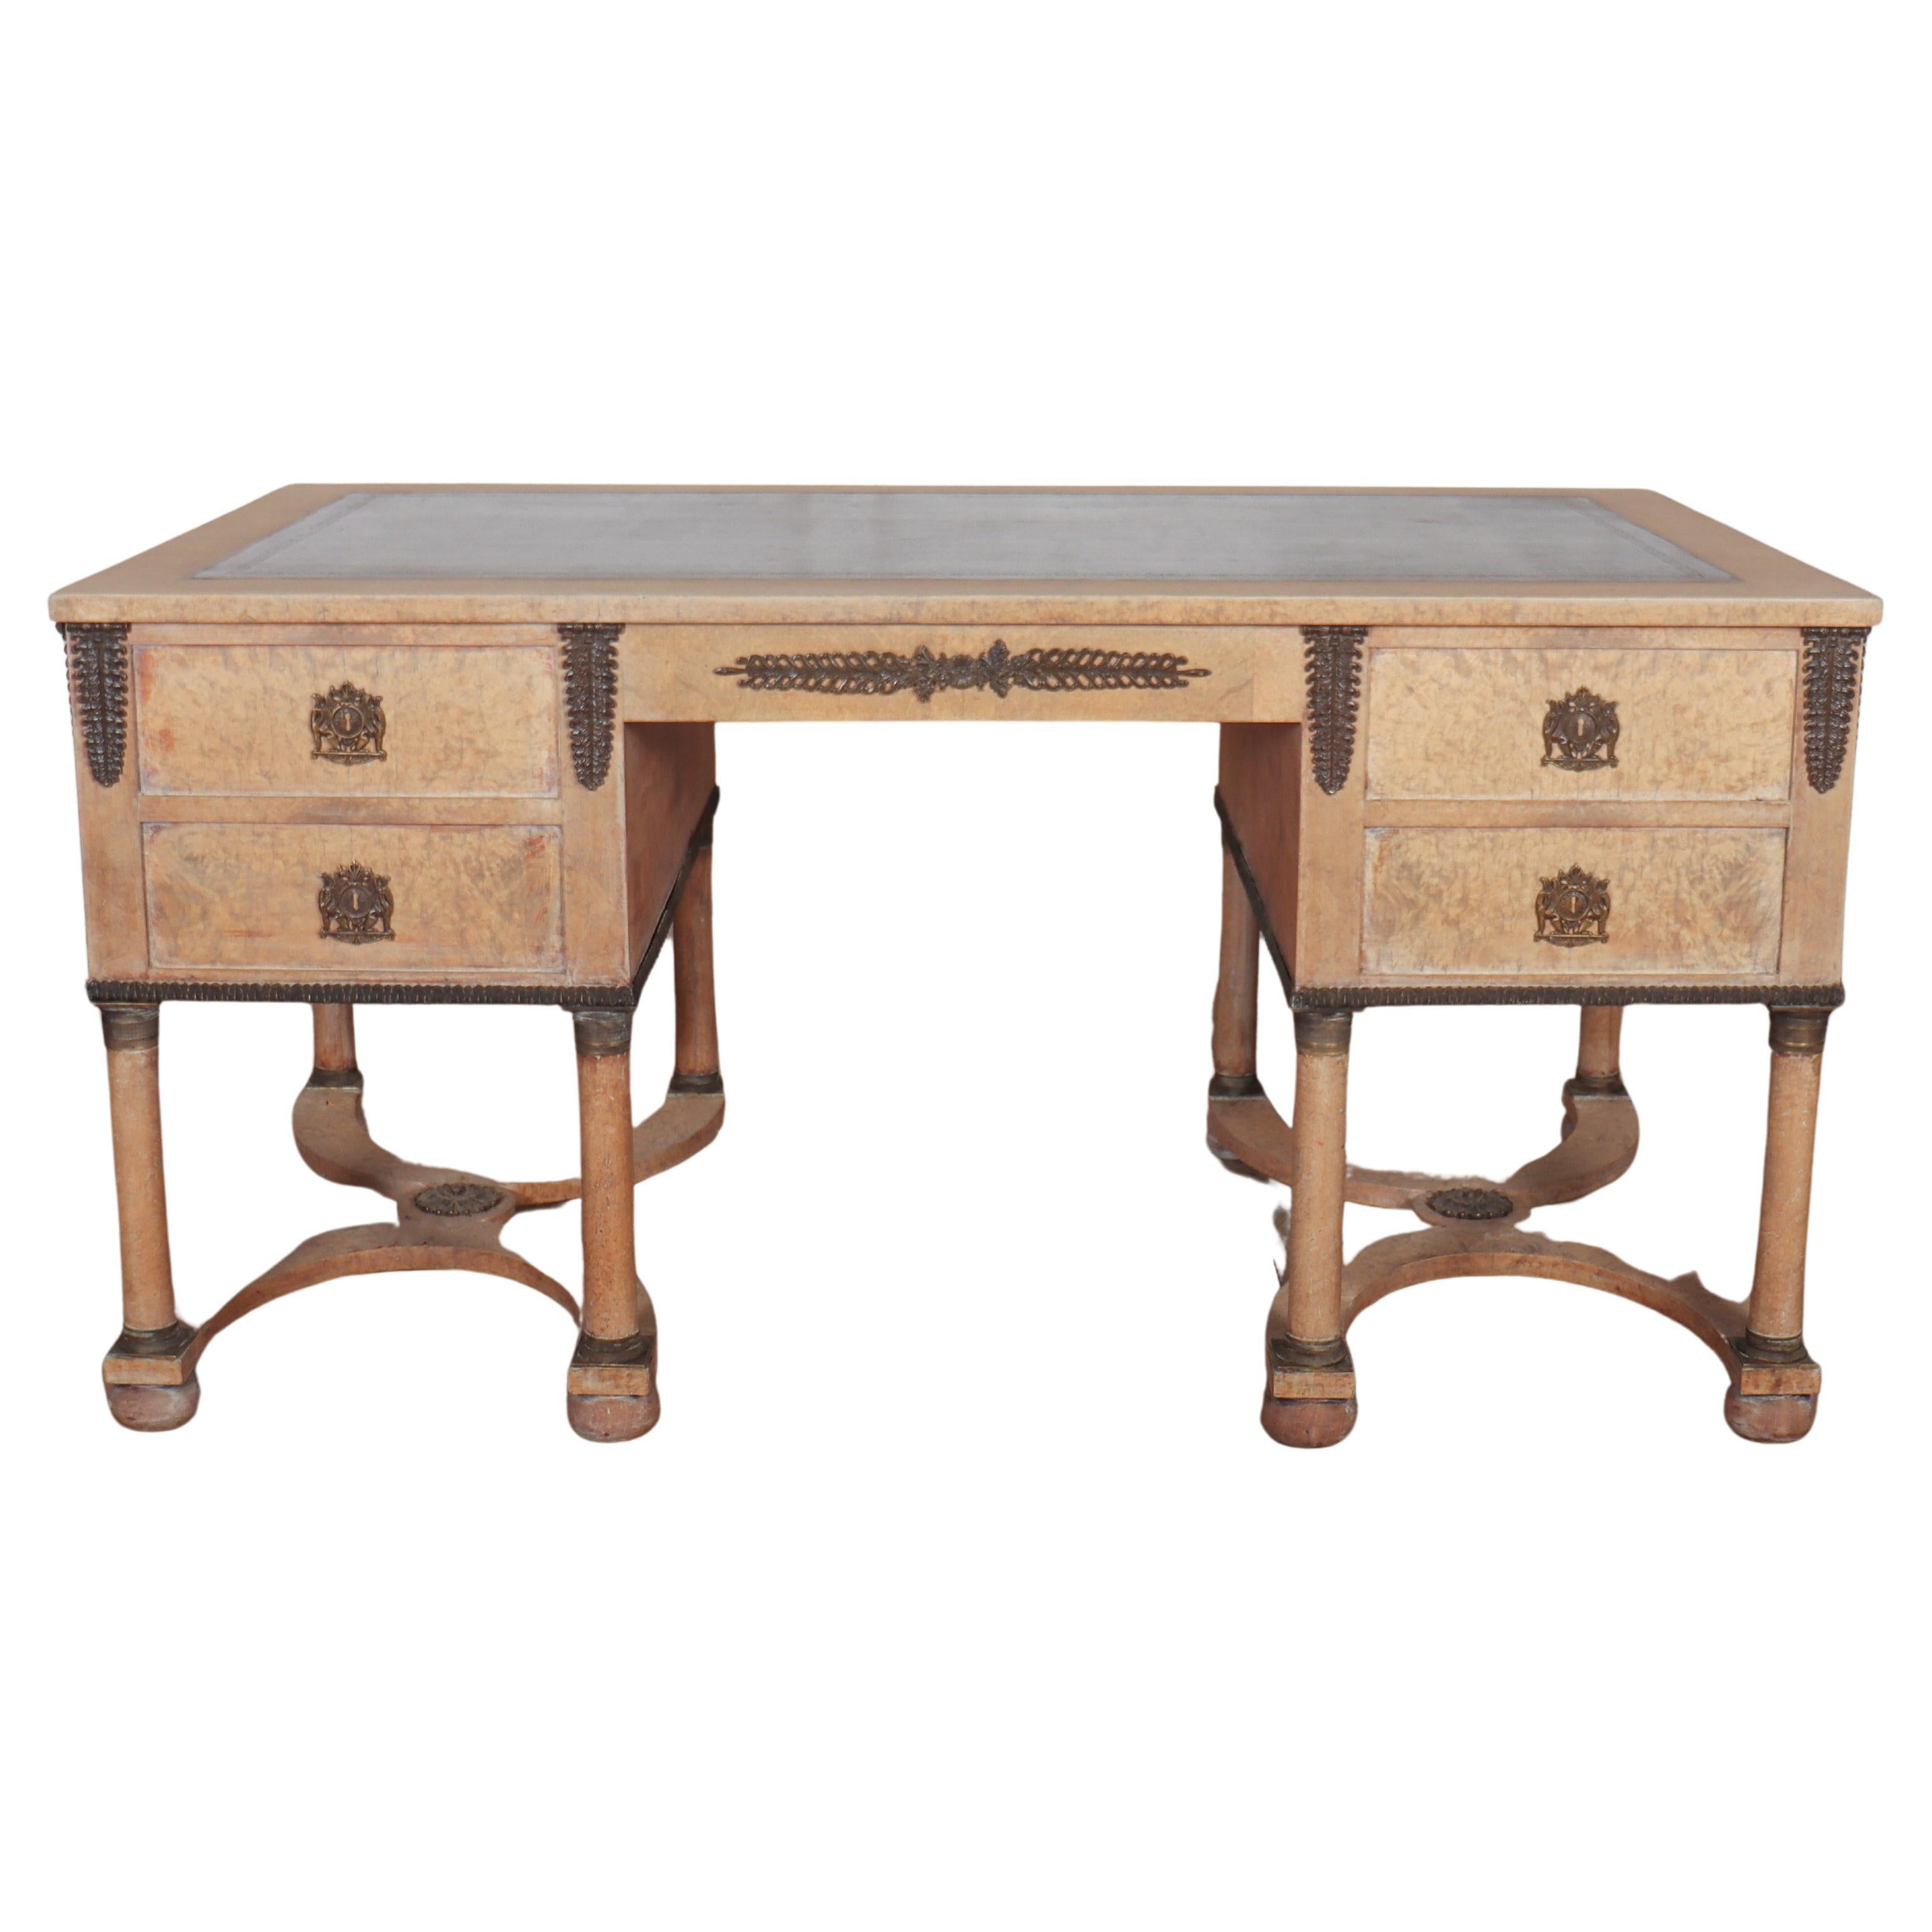 French Empire Style Writing Desk For Sale